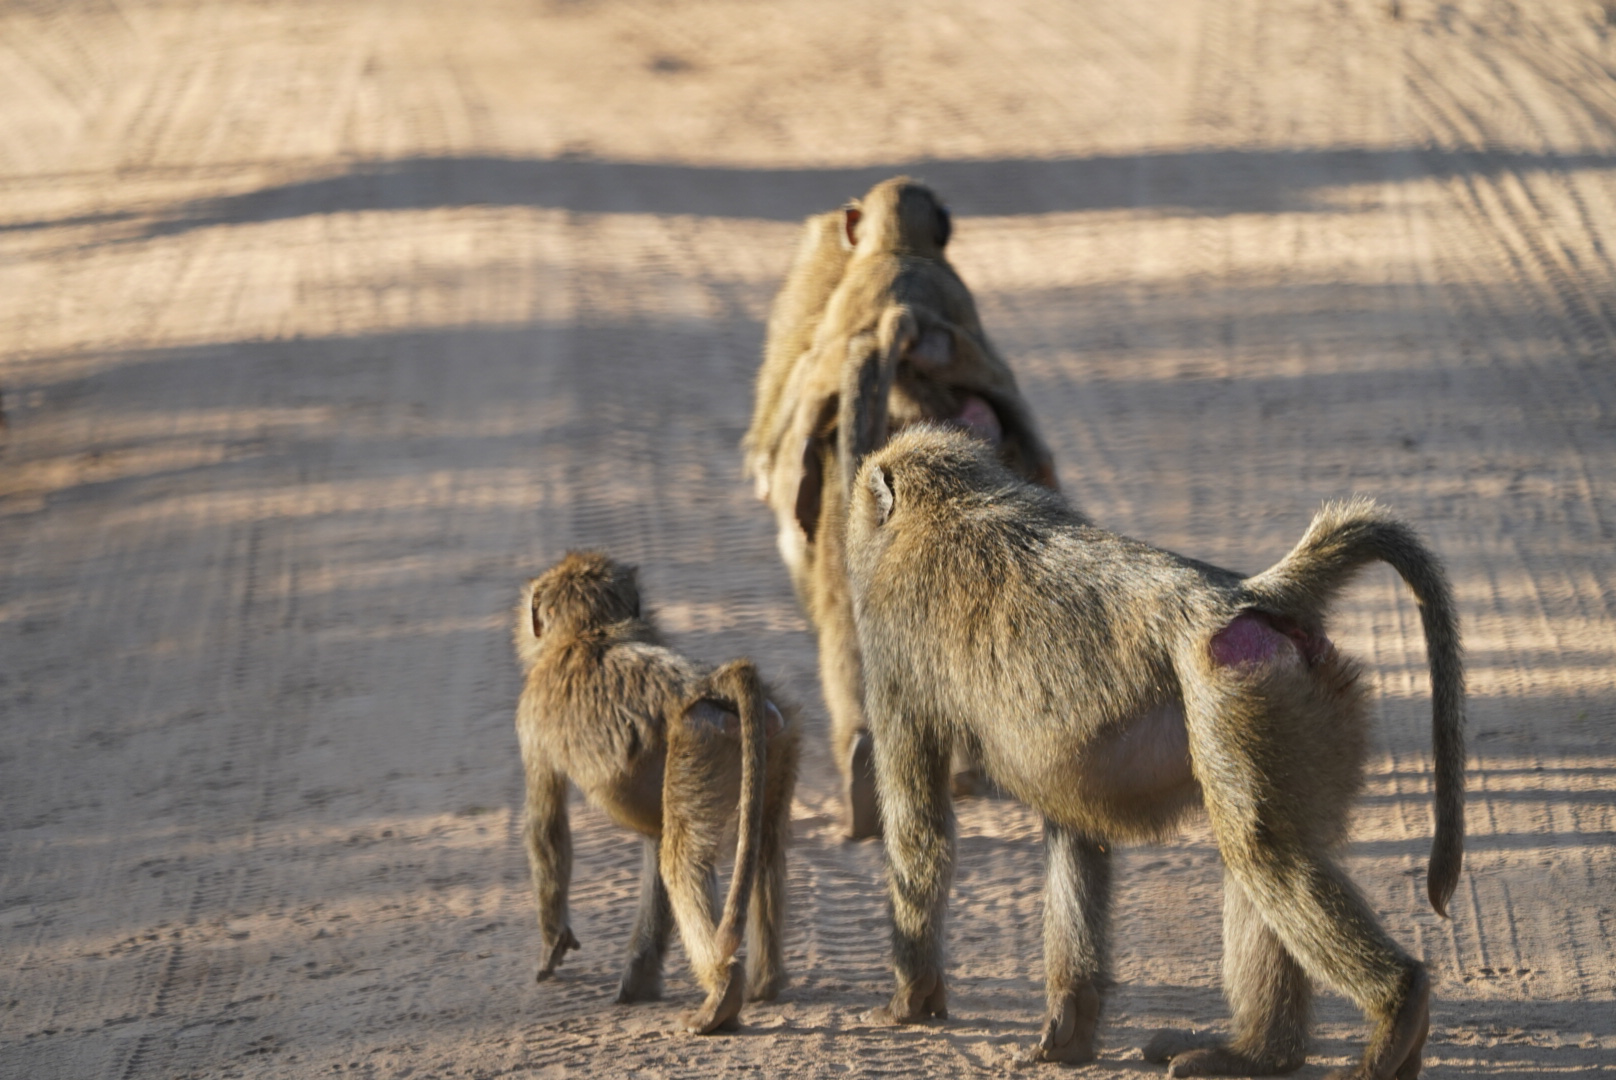 A family of baboons walks away from the camera-- two adults walking beside one child, and the adult in front carrying a baby on their back. The sun casts a warm light on them and the dirt road below them.